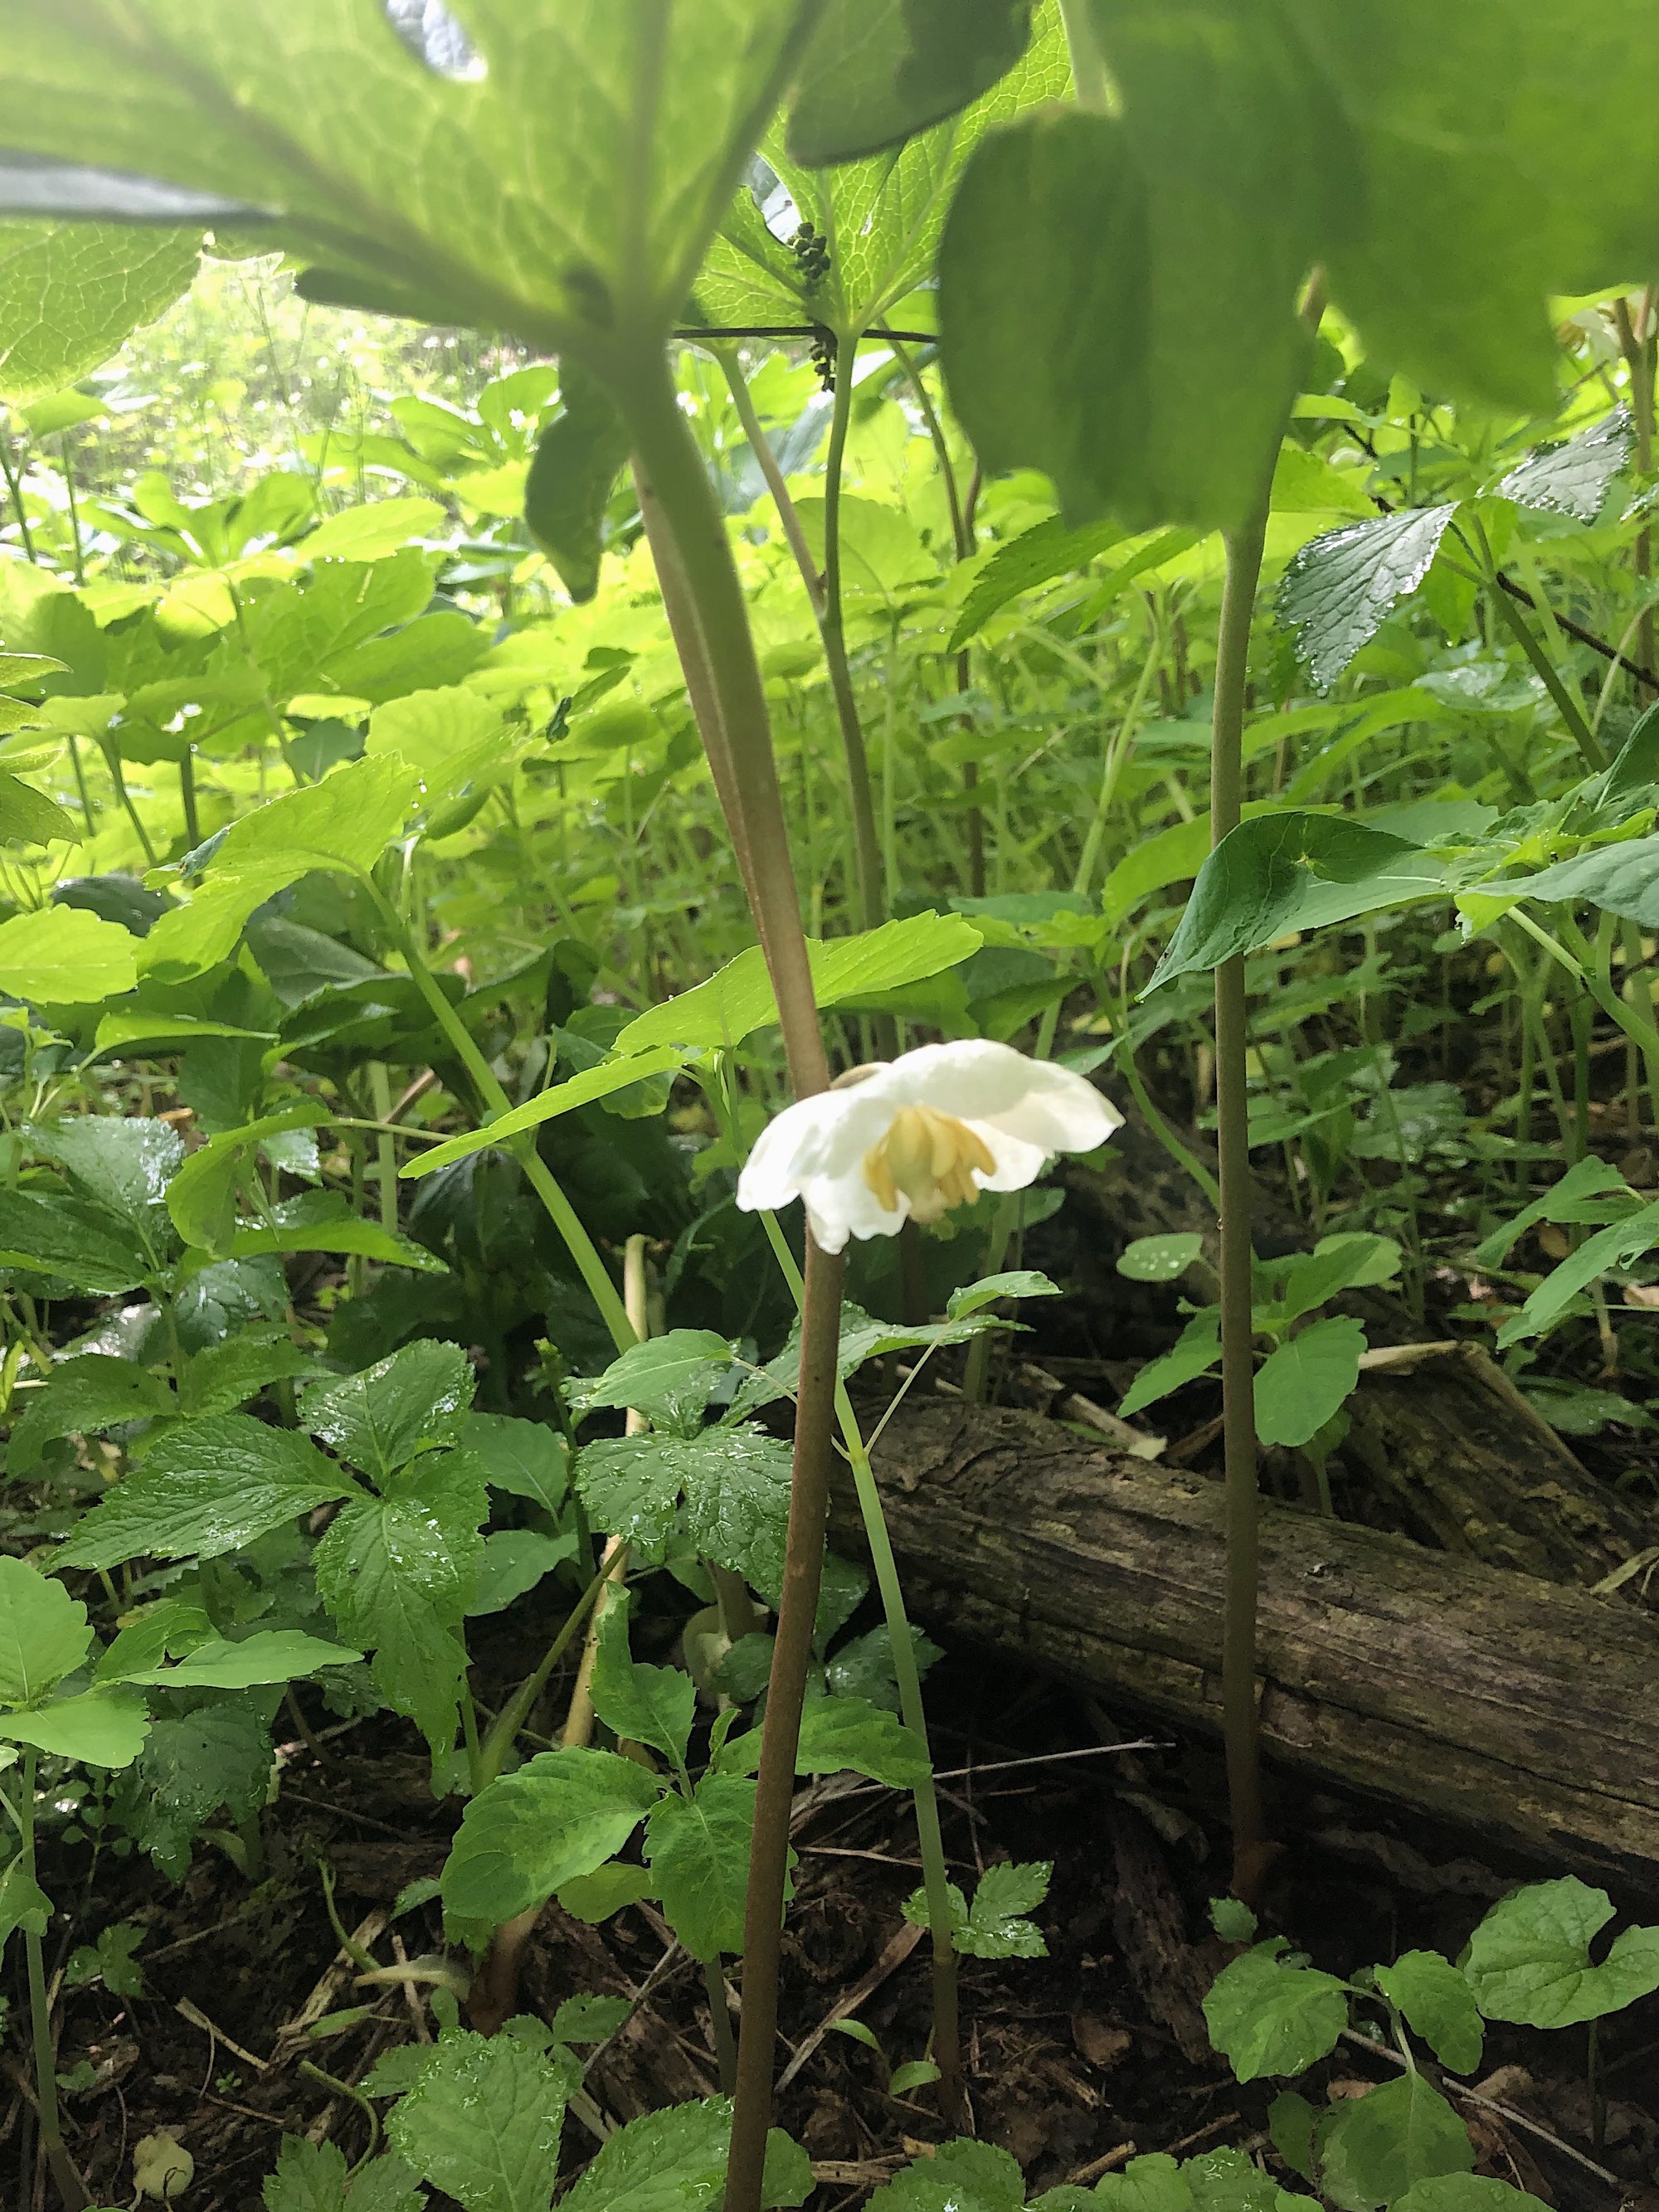 Mayapple blooms in wood between Duck Pond and Marion Dunn in Madison, Wisconsin on May 23, 2020.